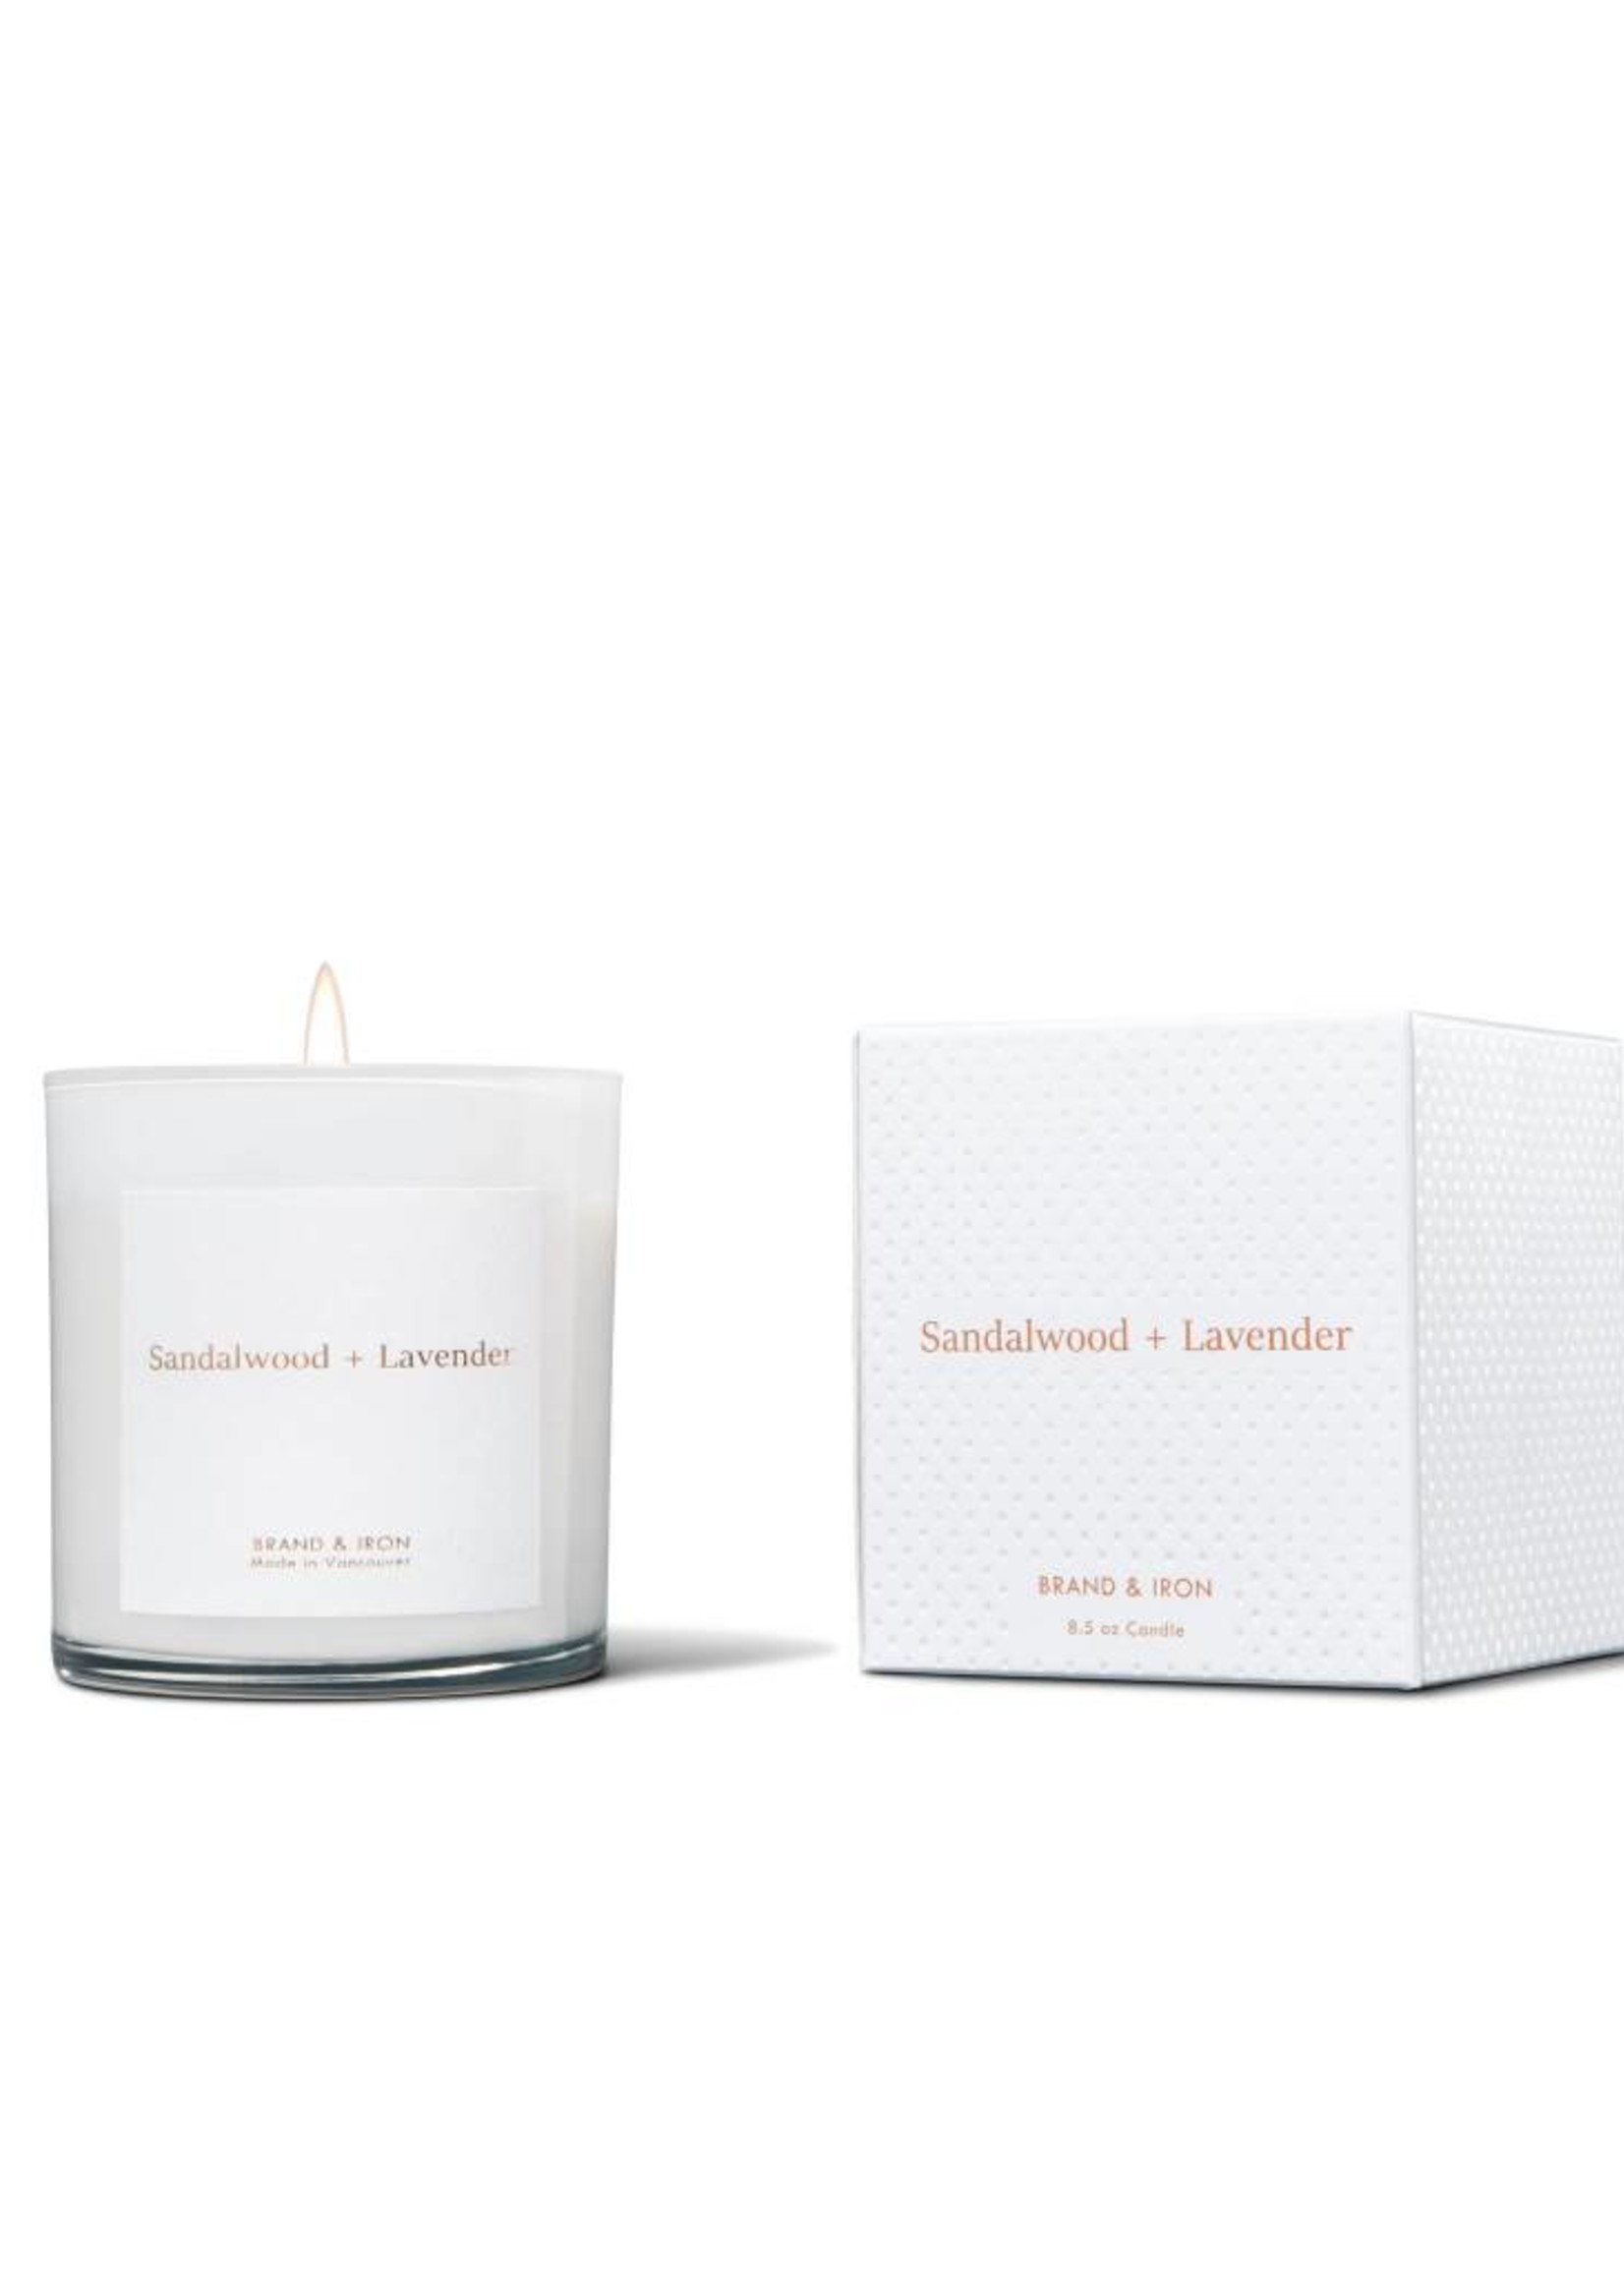 Brand & Iron Home Series Sandalwood and Lavender